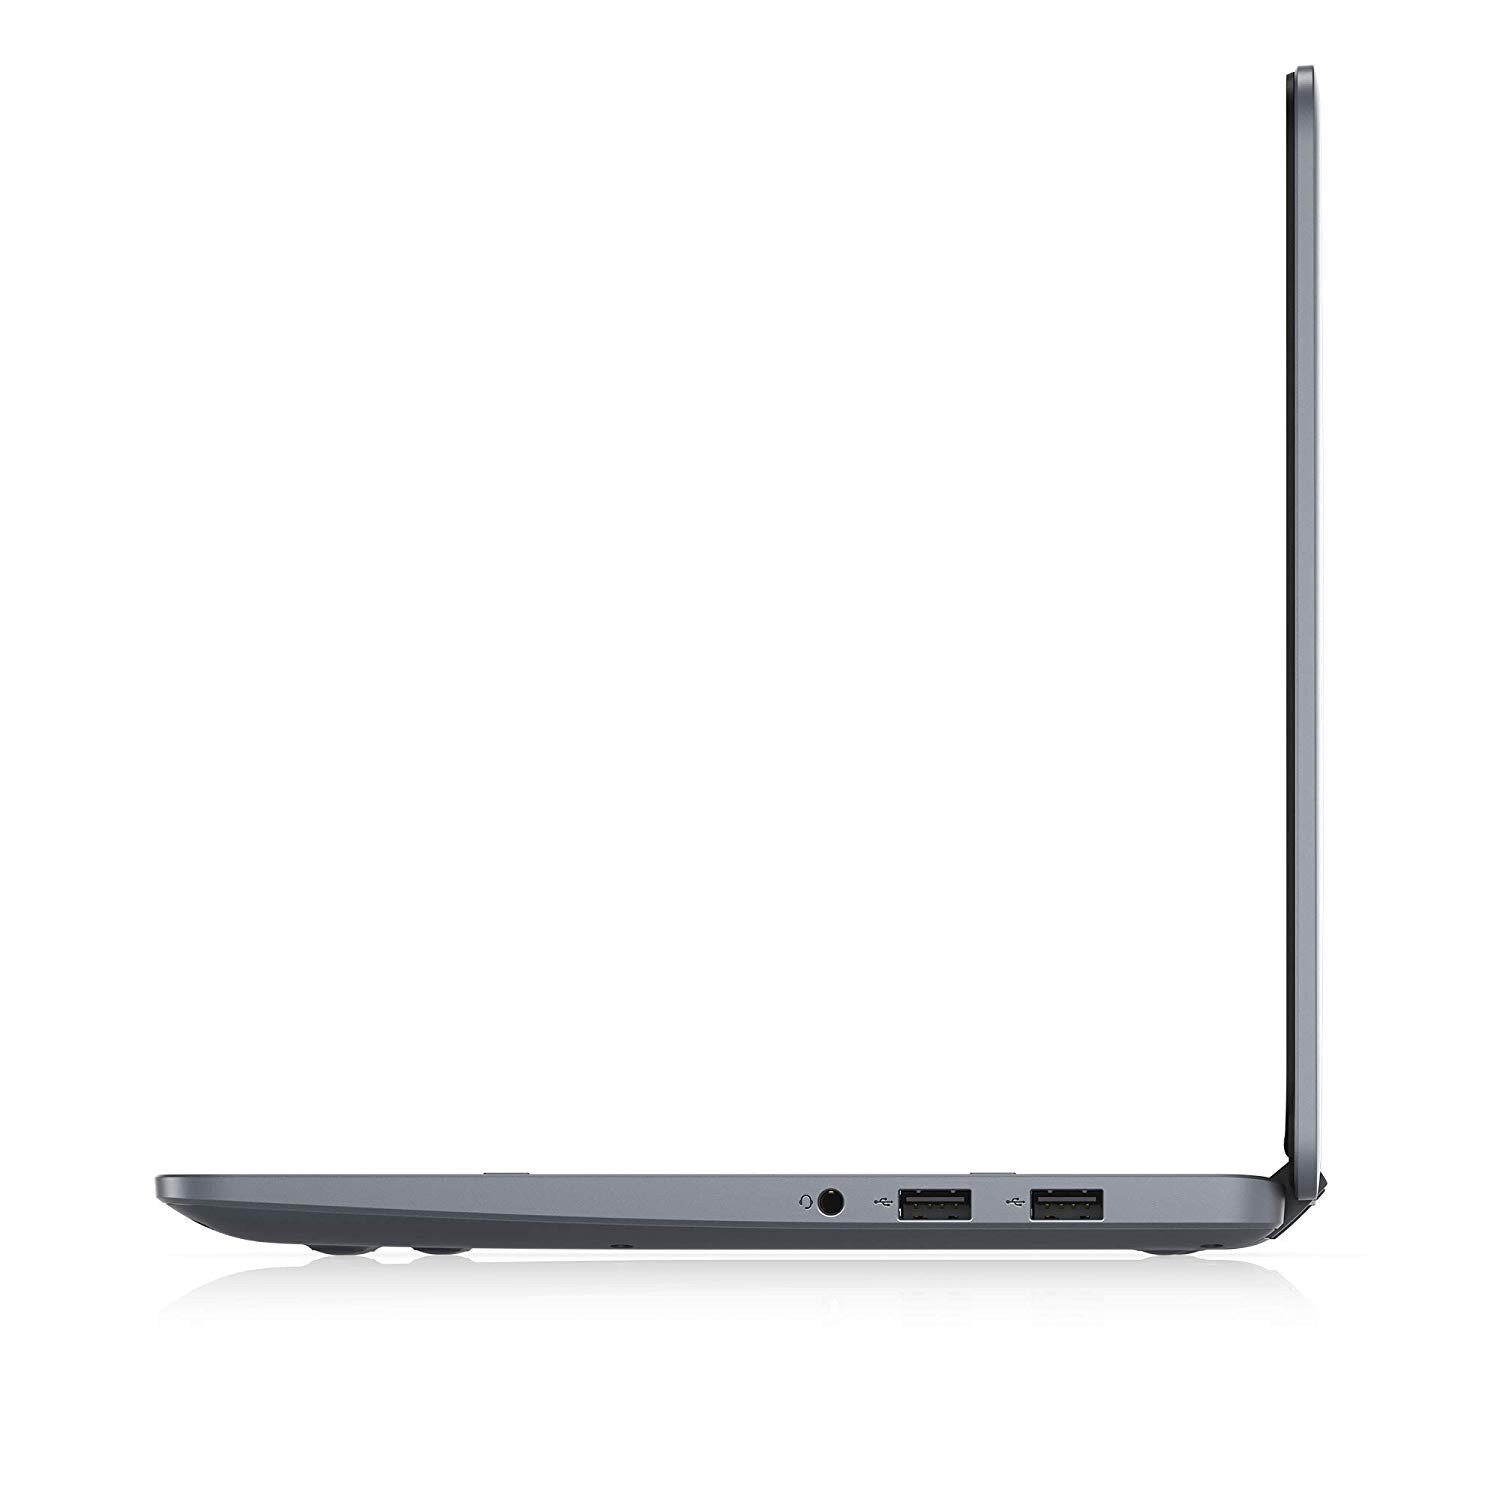 2019 Newest Dell Inspiron 11 3195 2-in-1 11.6 Inch Touchscreen ...